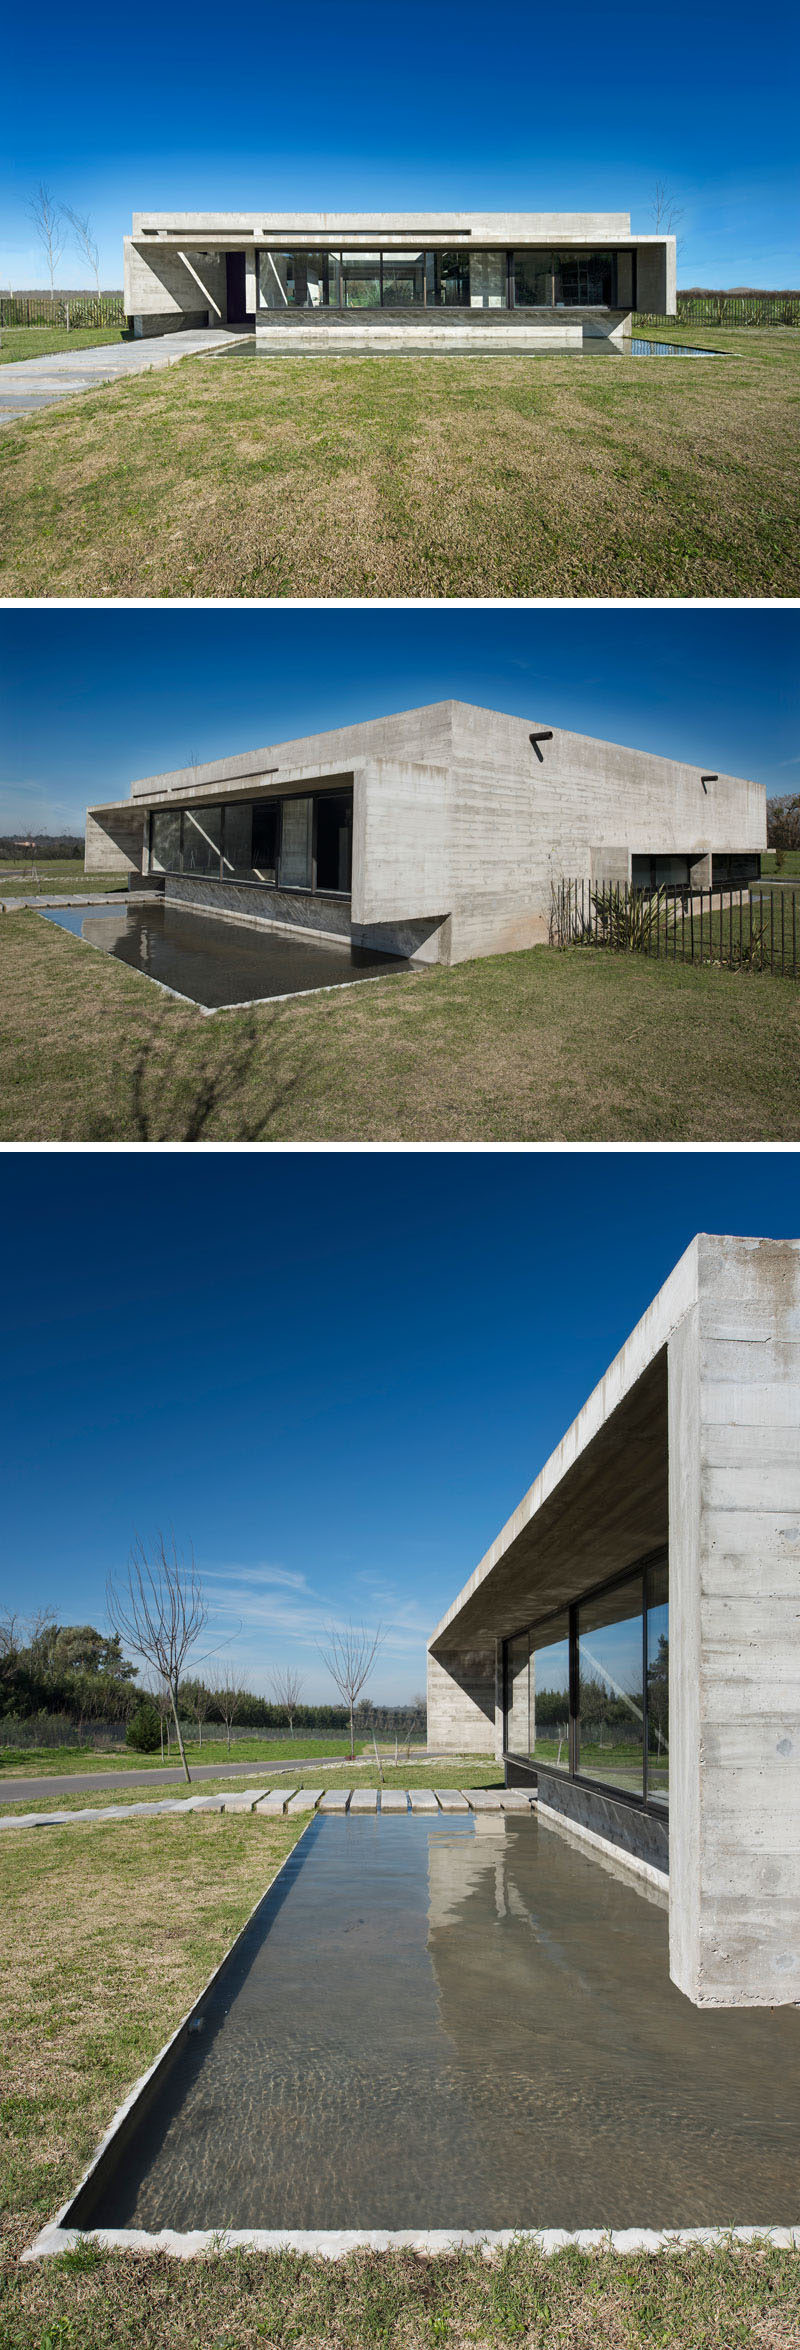 Architect Luciano Kruk, has designed a new modern concrete house in a gated community in Maschwitz, a town in northern Buenos Aires. #ConcreteHouse #Architecture #ModernHouse